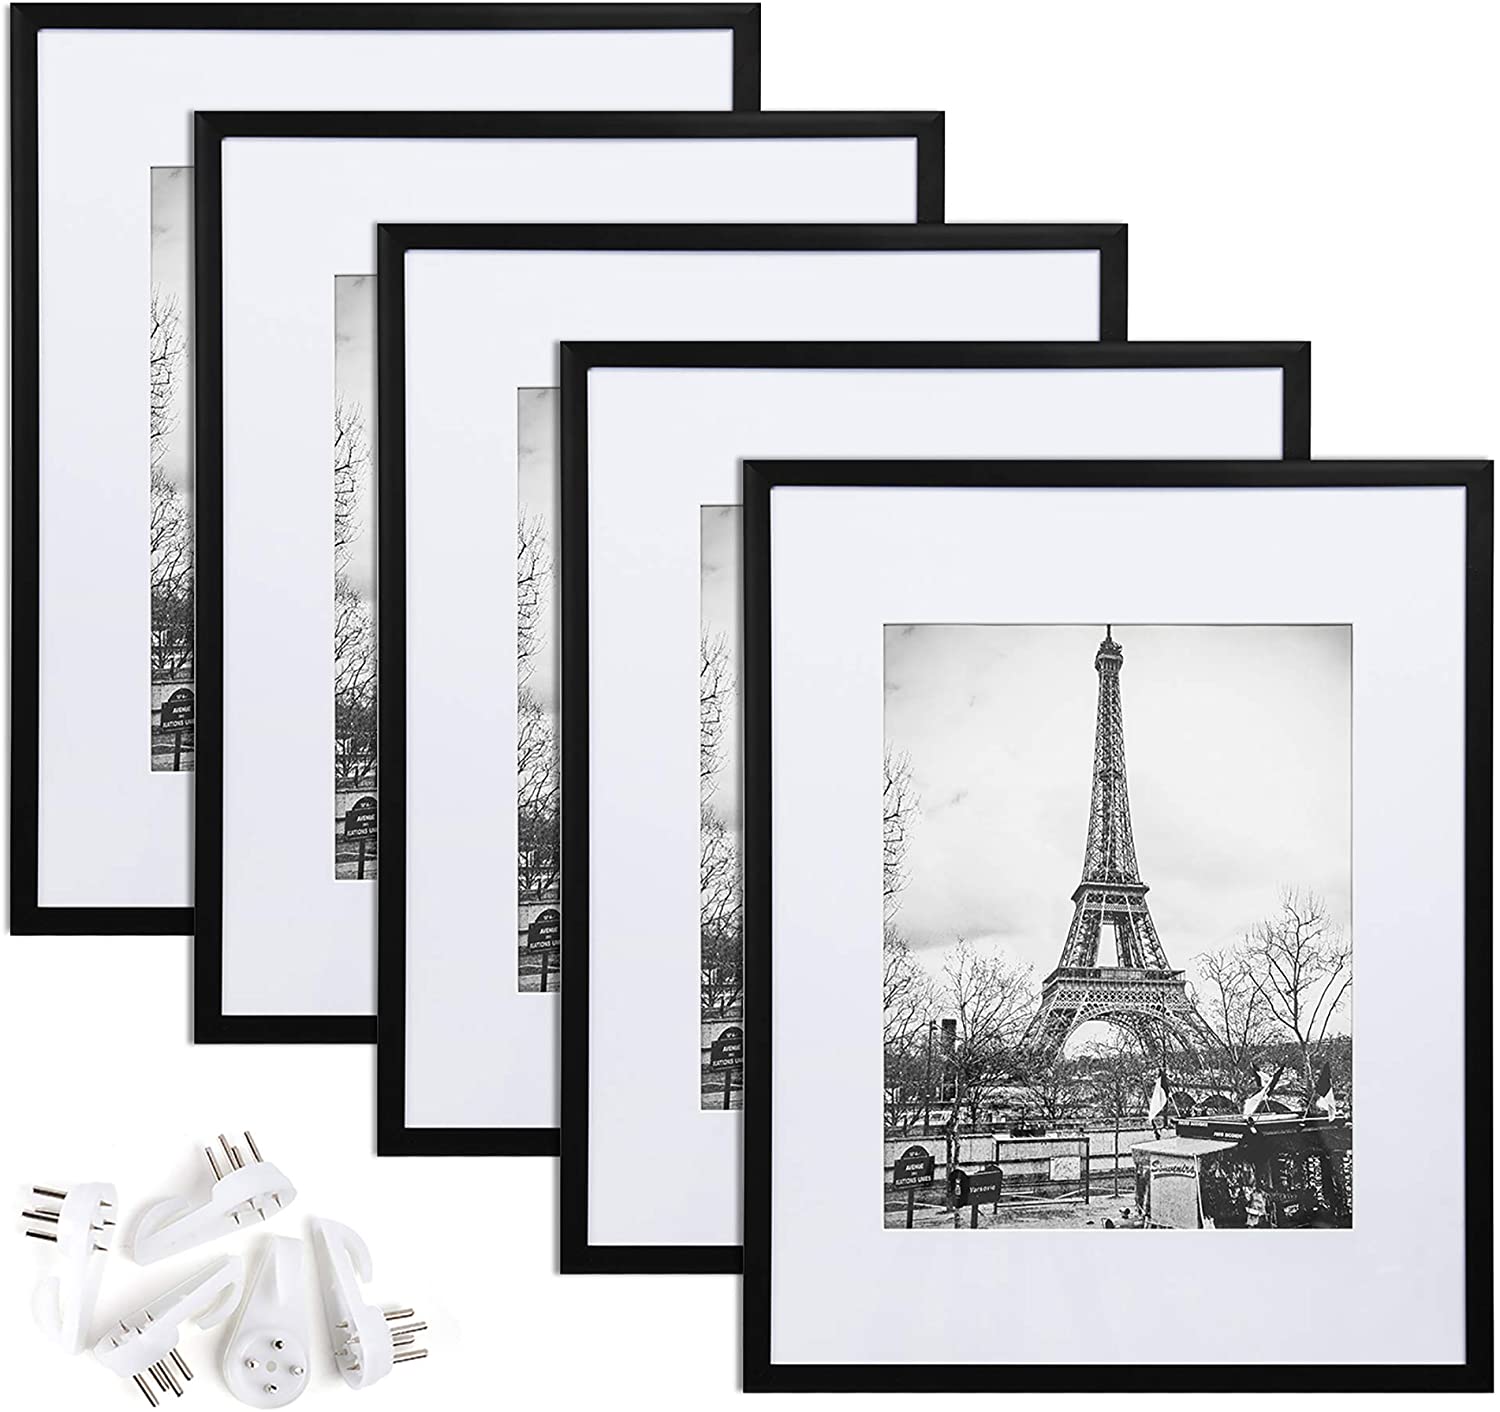  TWING 16 x 20 Picture Frame Set of 6, Classic Picture Frames  Display Pictures 11x14 with Mat or 16x20 Without Mat, Wall Mounting Home  Decor Collage Photo Frames Poster Frame